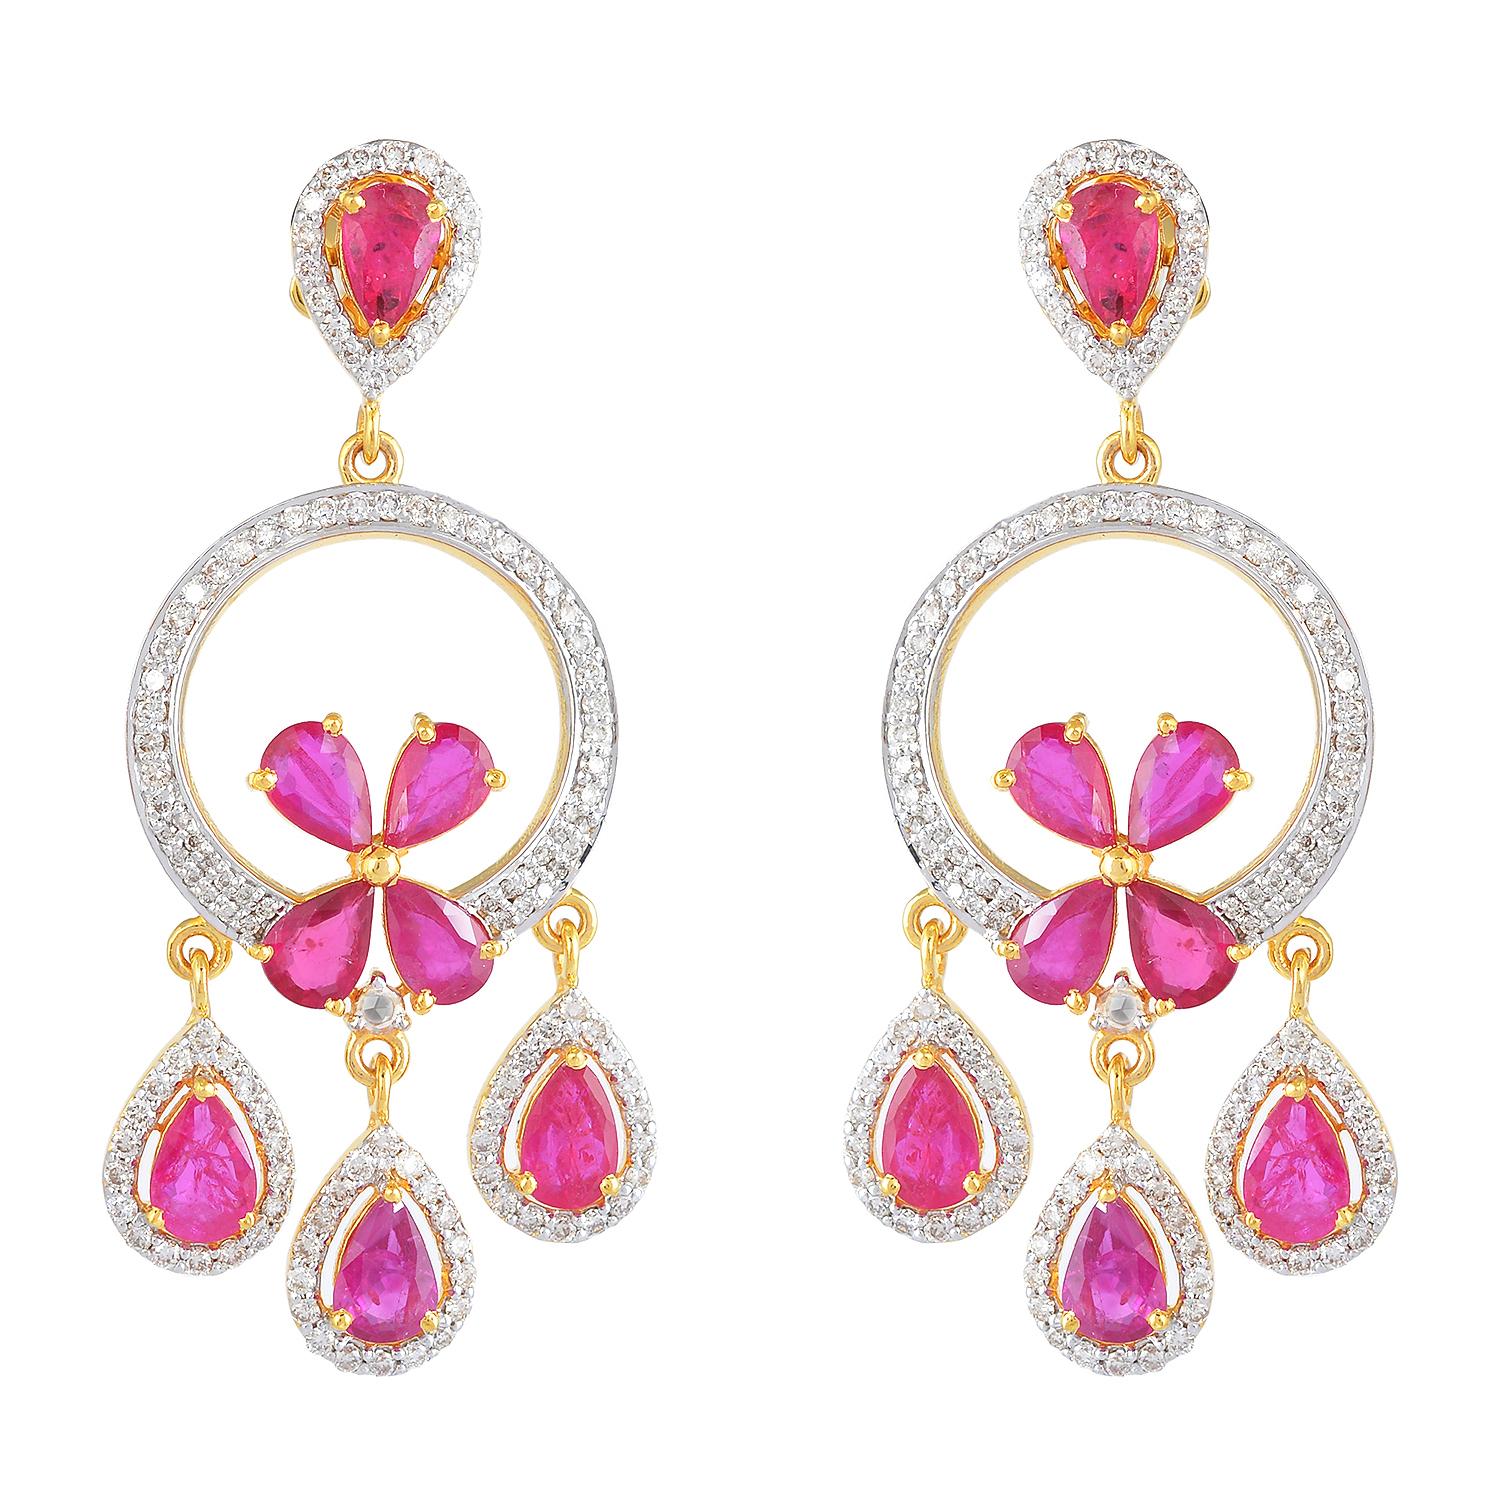 These dazzling earrings are made of 14K gold and feature a beautiful ruby gemstone. The earrings are designed to dangle and are perfect for any occasion.

Specifications

Dimensions: Length: 5 cm, Width: 2 cm
Gross Weight: 13.040 gms
Gold Weight: